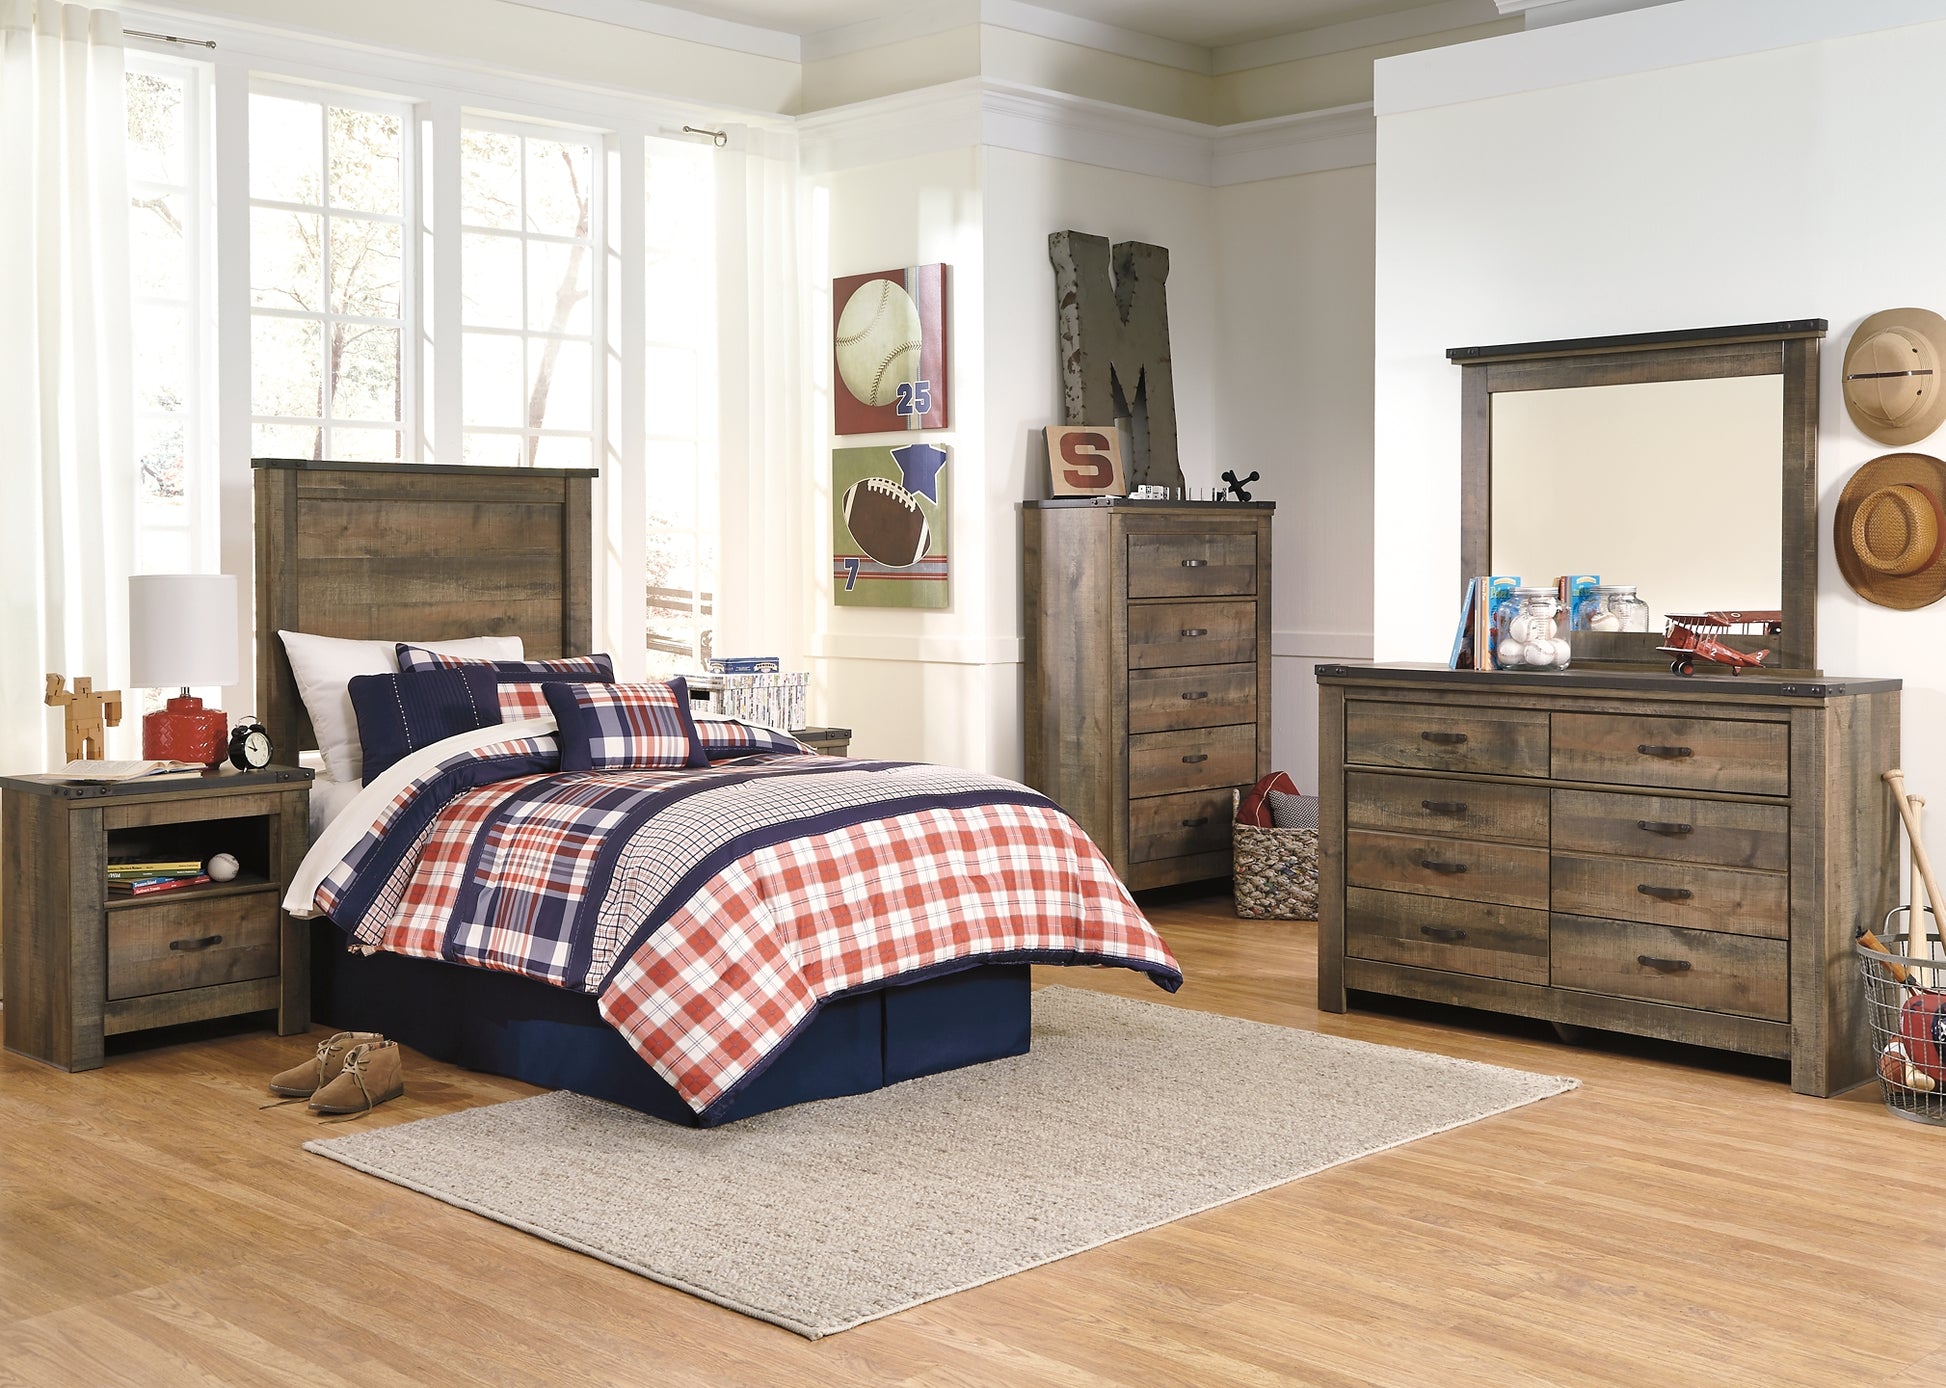 Trinell Five Drawer Chest JB's Furniture  Home Furniture, Home Decor, Furniture Store